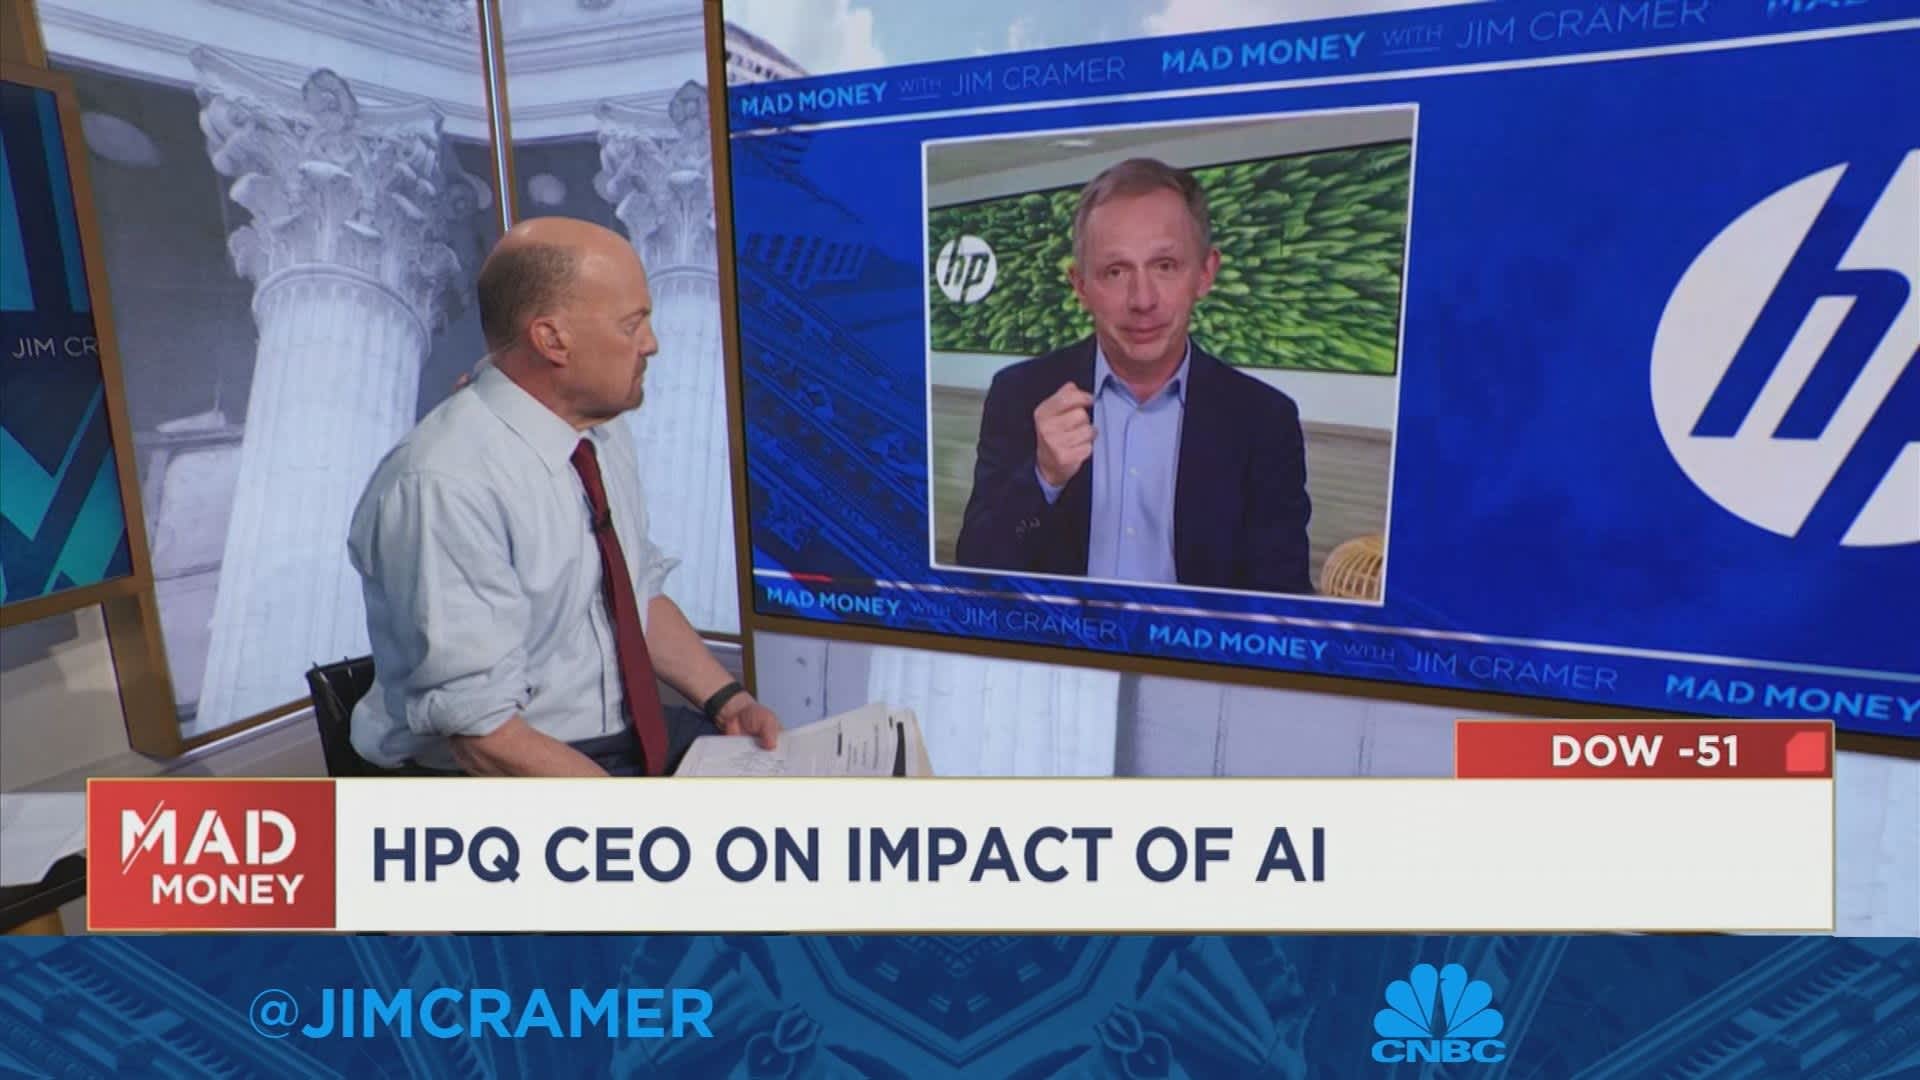 A.I. will help us 'redefine what a PC is', says HP CEO Enrique Lores